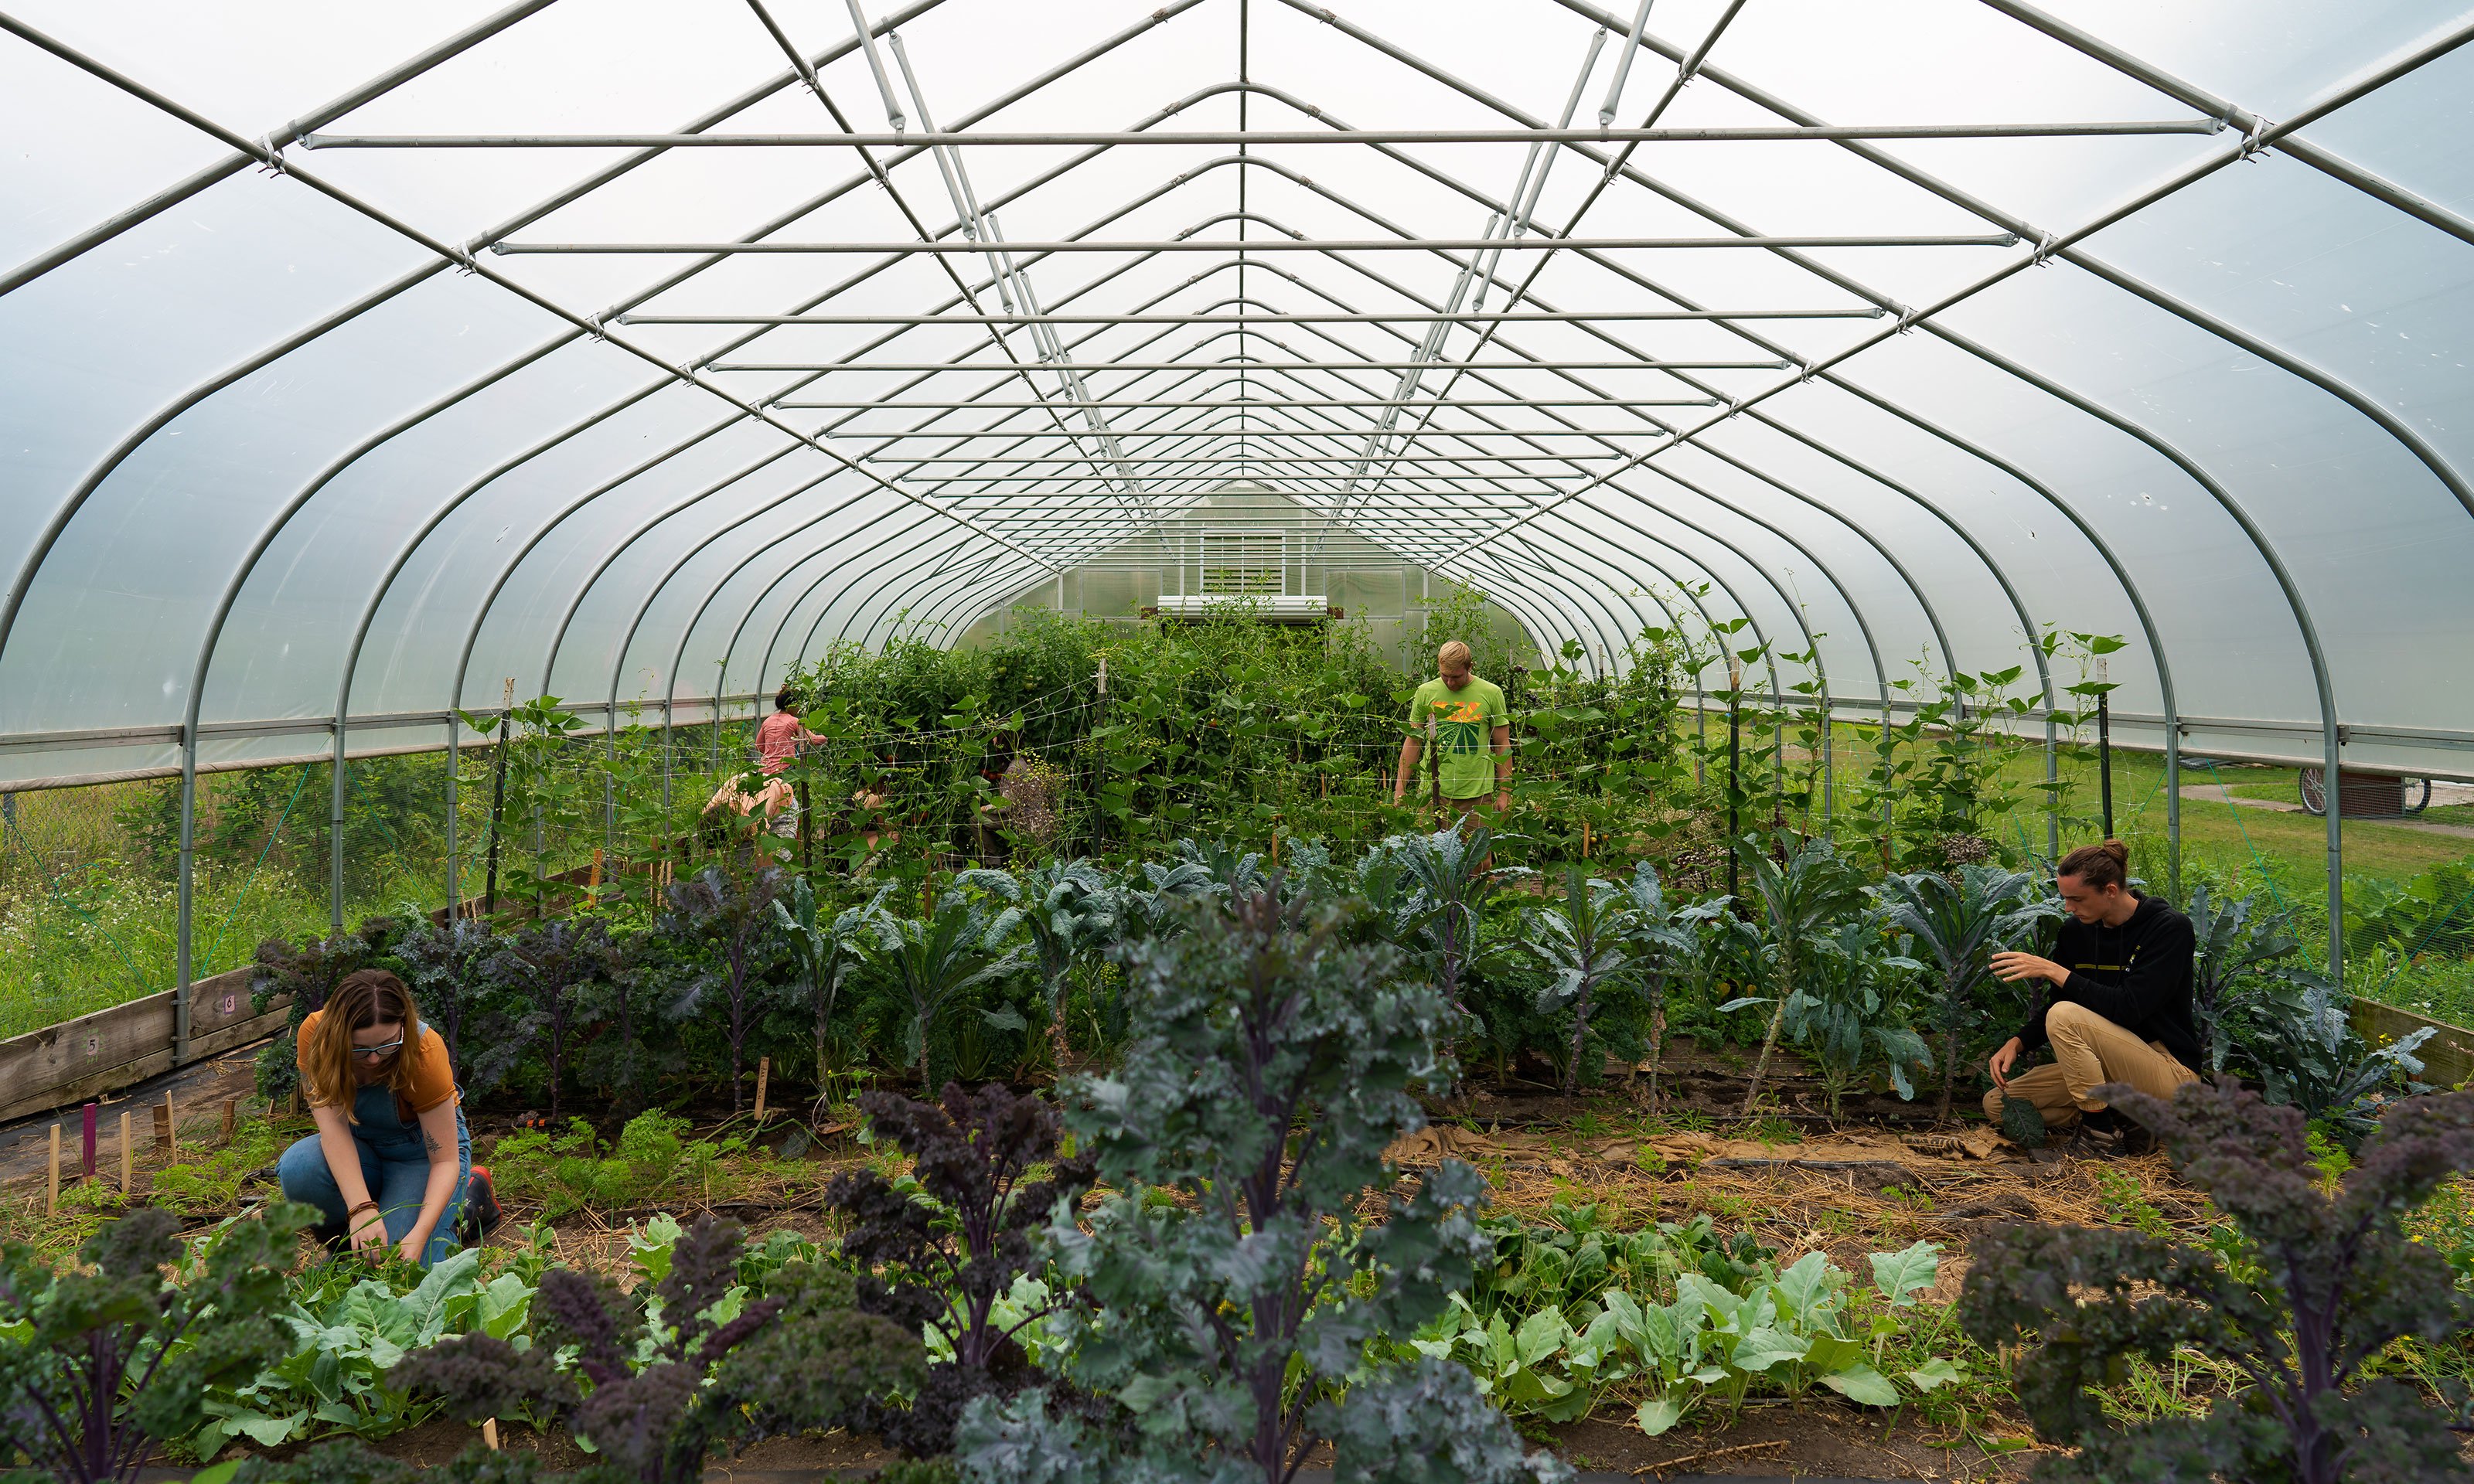 A wide view of the students in the greenhouse